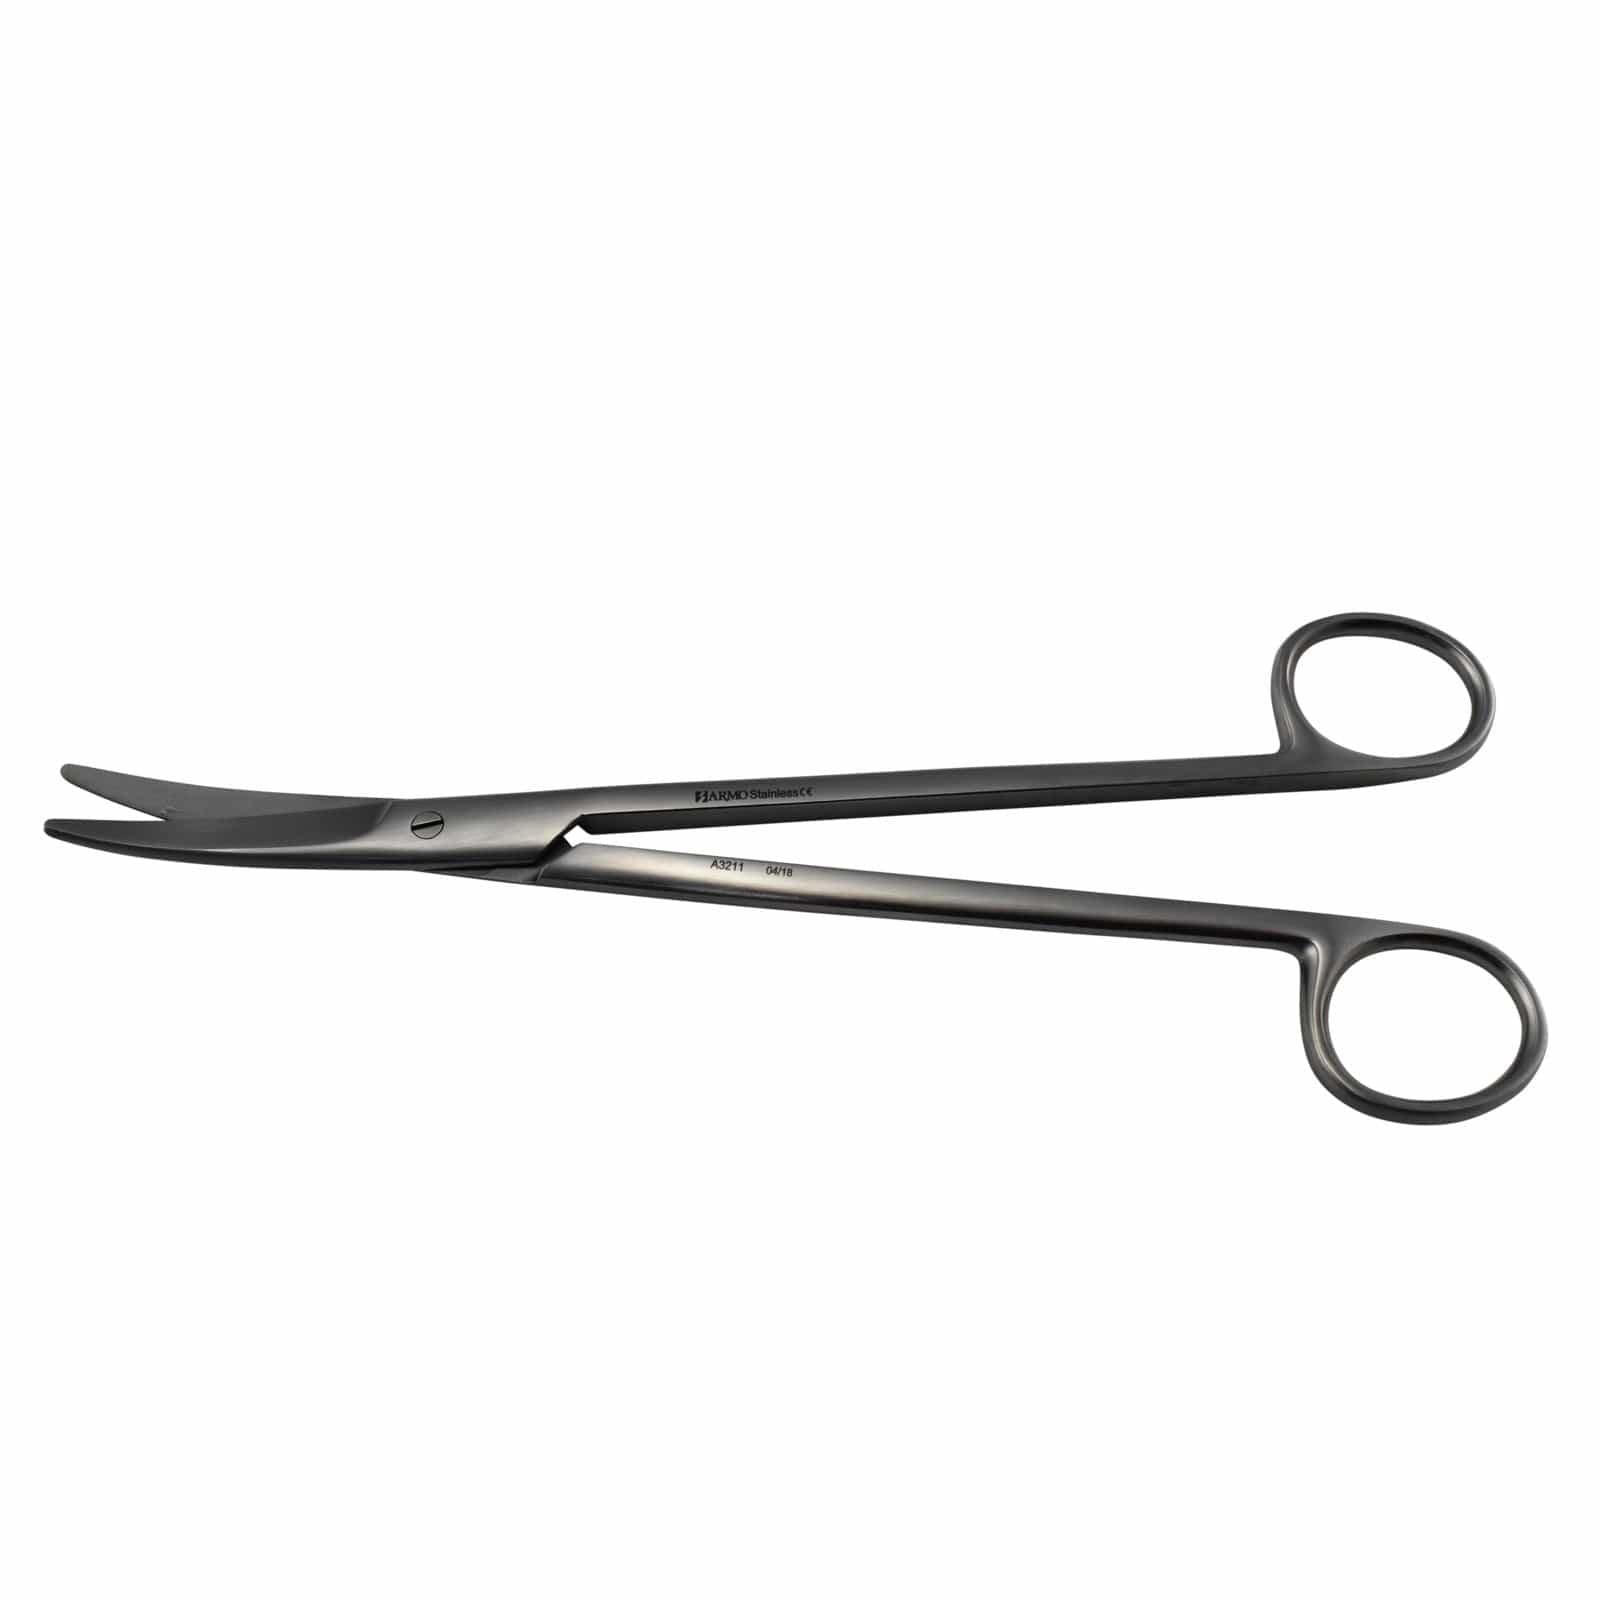 Armo Surgical Instruments 20cm / Curved / Standard Armo Mayo Scissors